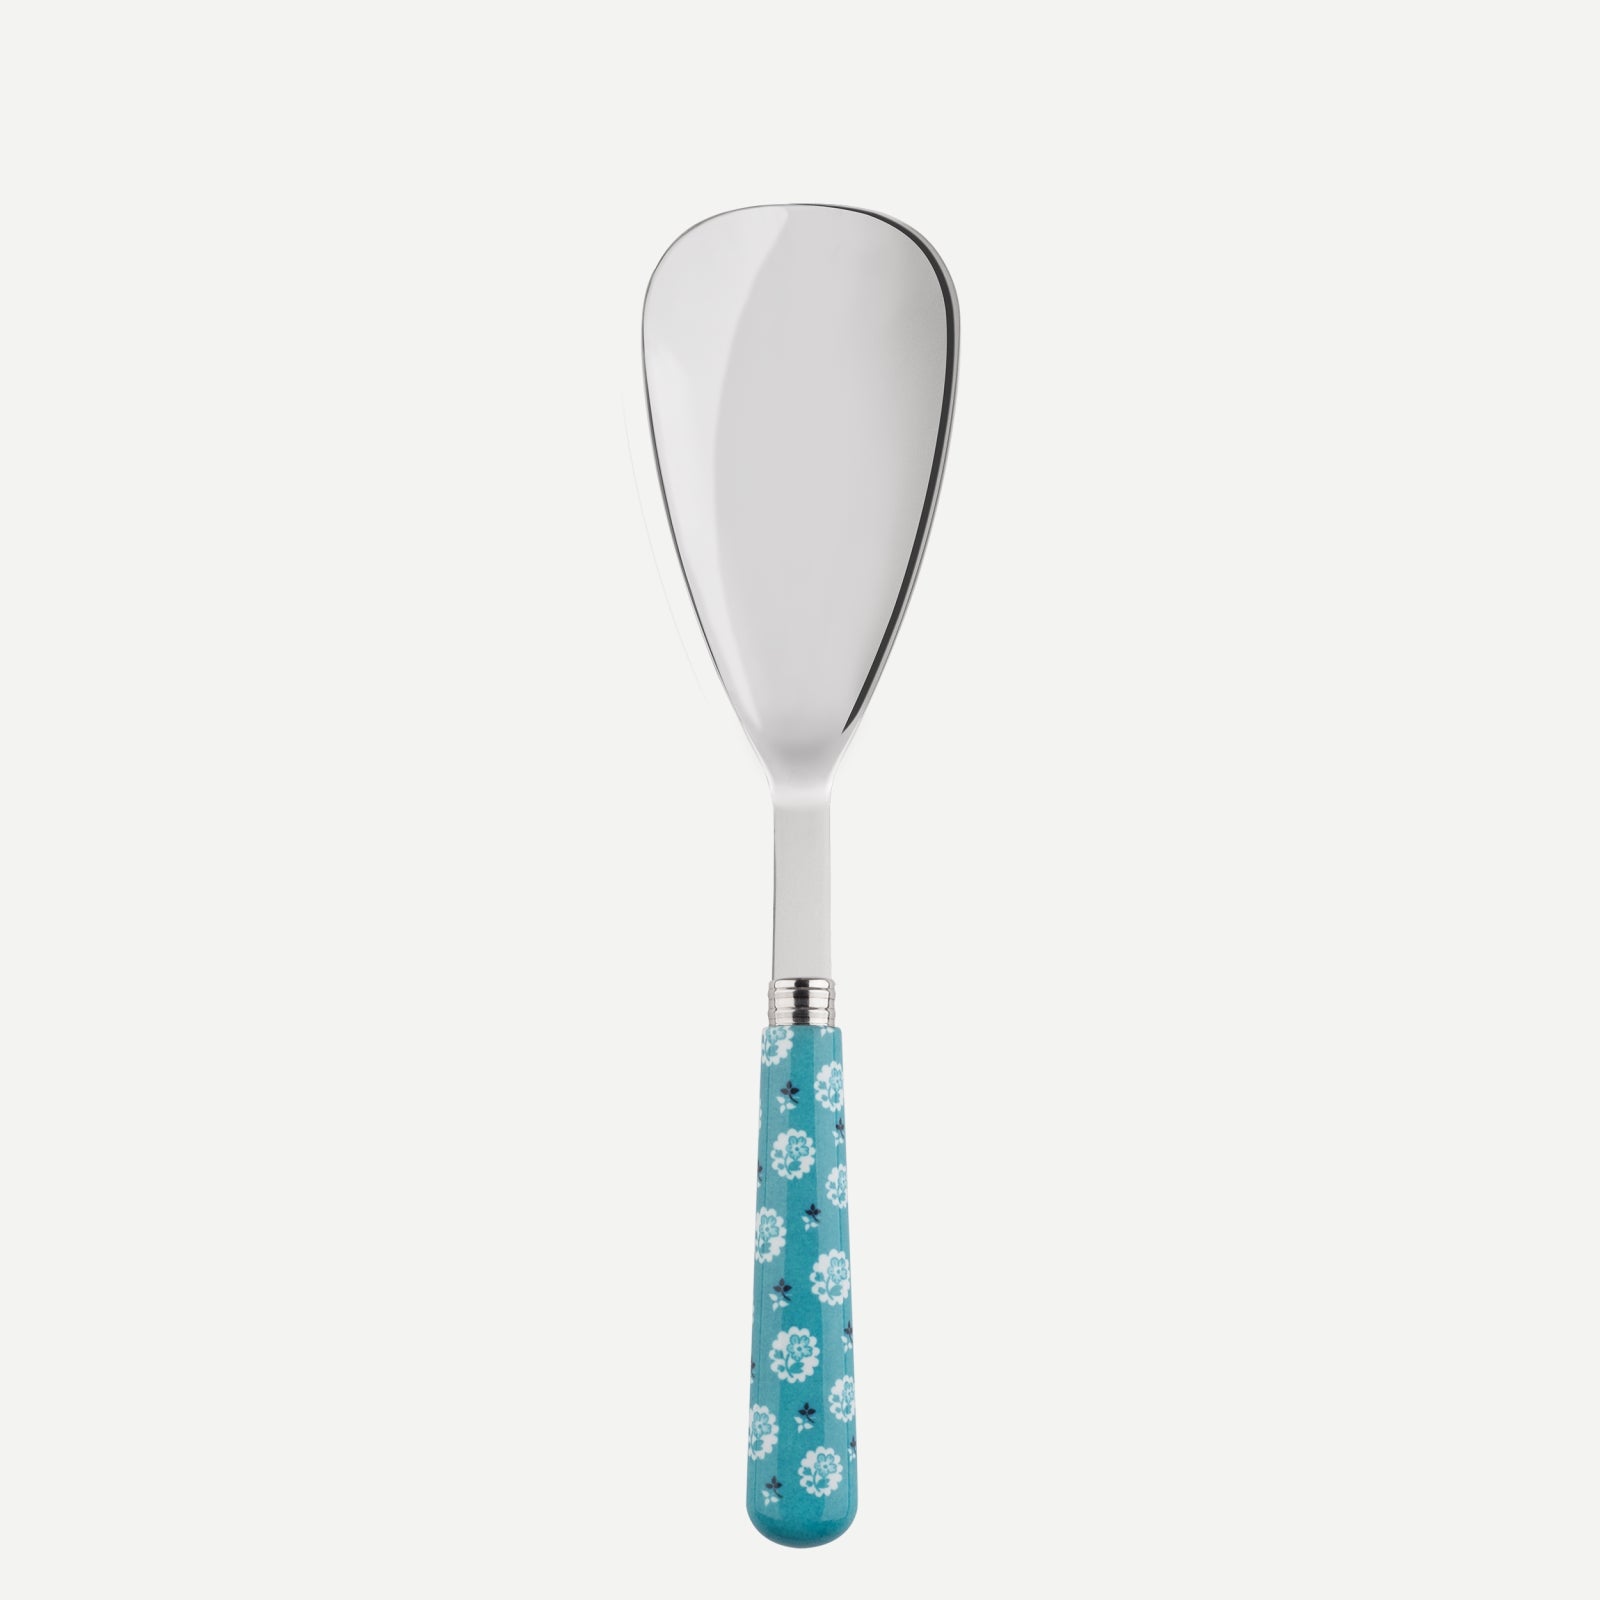 Rice spoon - Provencal - Turquoise